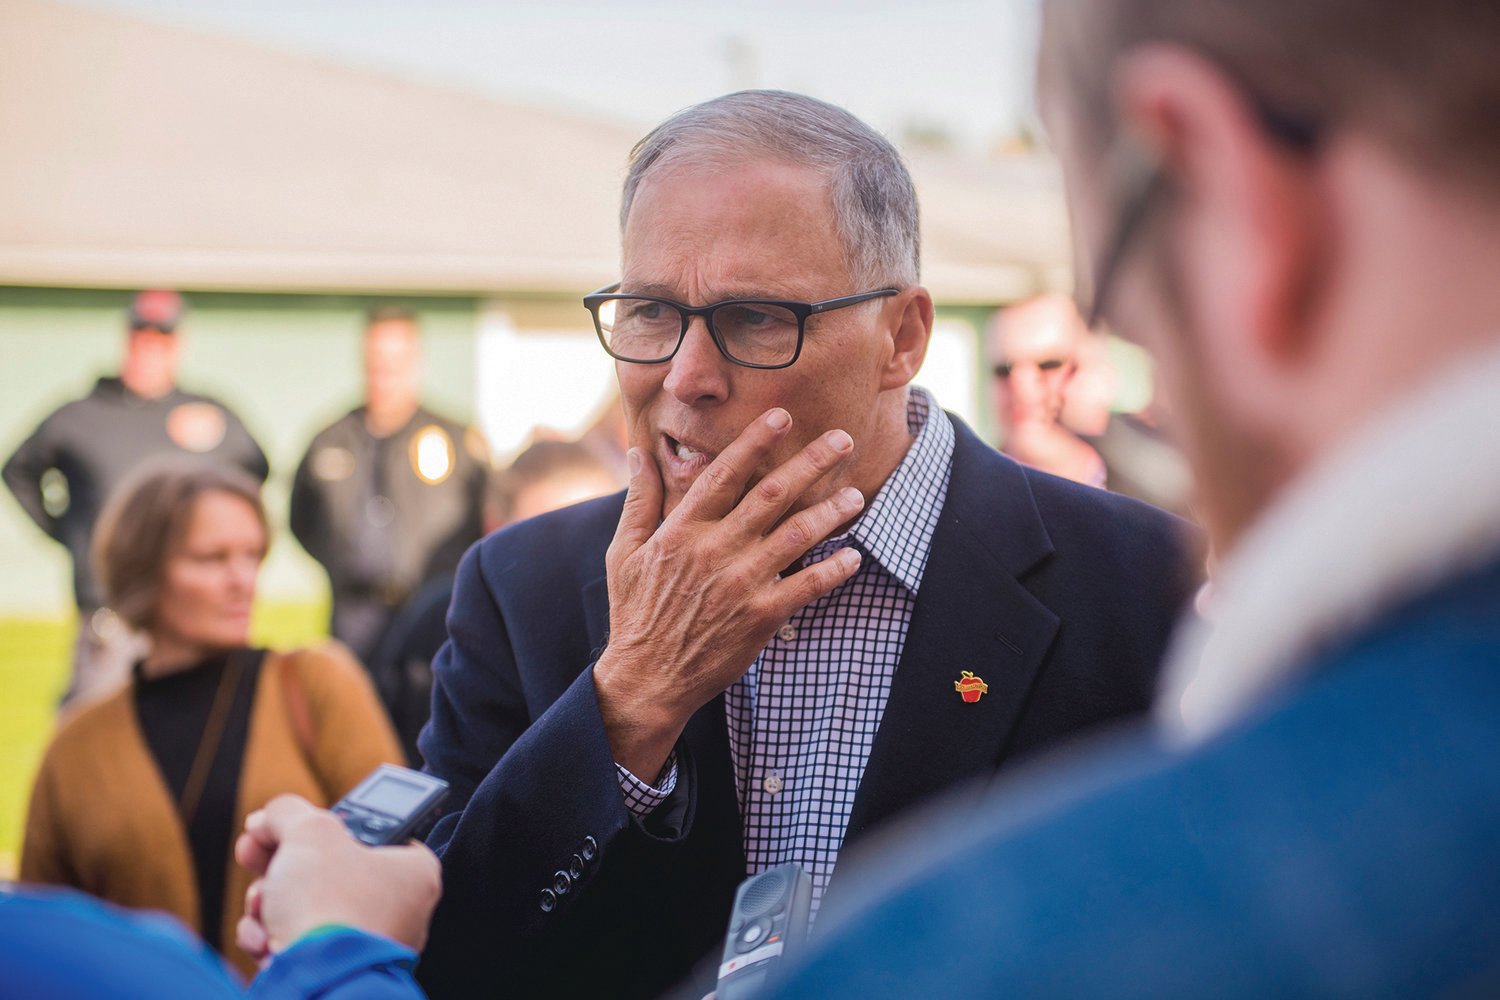 FILE PHOTO — Governor Jay Inslee talks during a press conference in November 2019 at the Southwest Washington Fairgrounds in Chehalis.